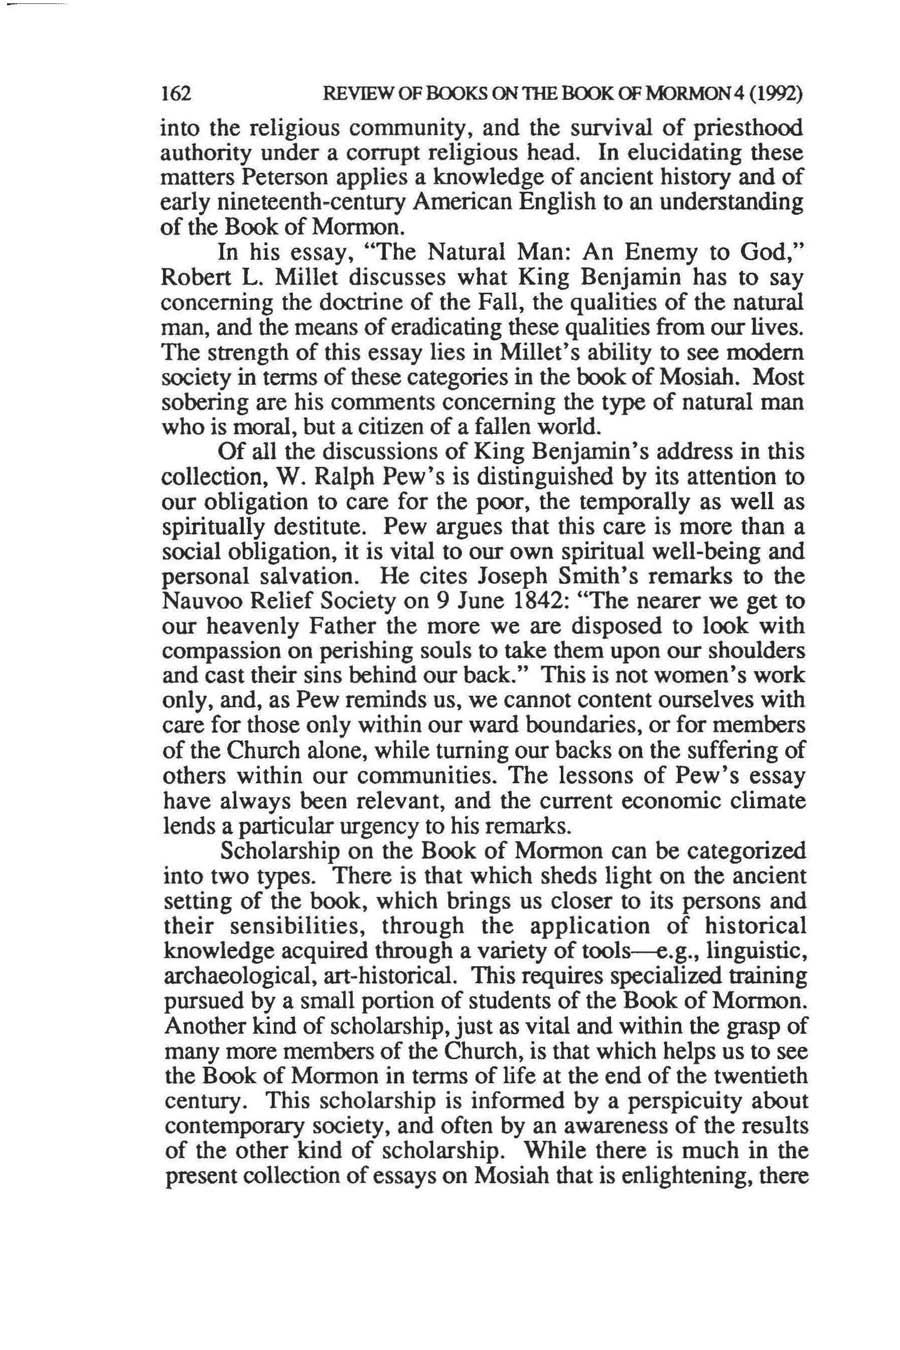 162 REVIEW OF BOOKS ON 1l-lE BOOK OF MORMON 4 (1992) into the religious community, and the survival of priesthood authority under a corrupt religious head.